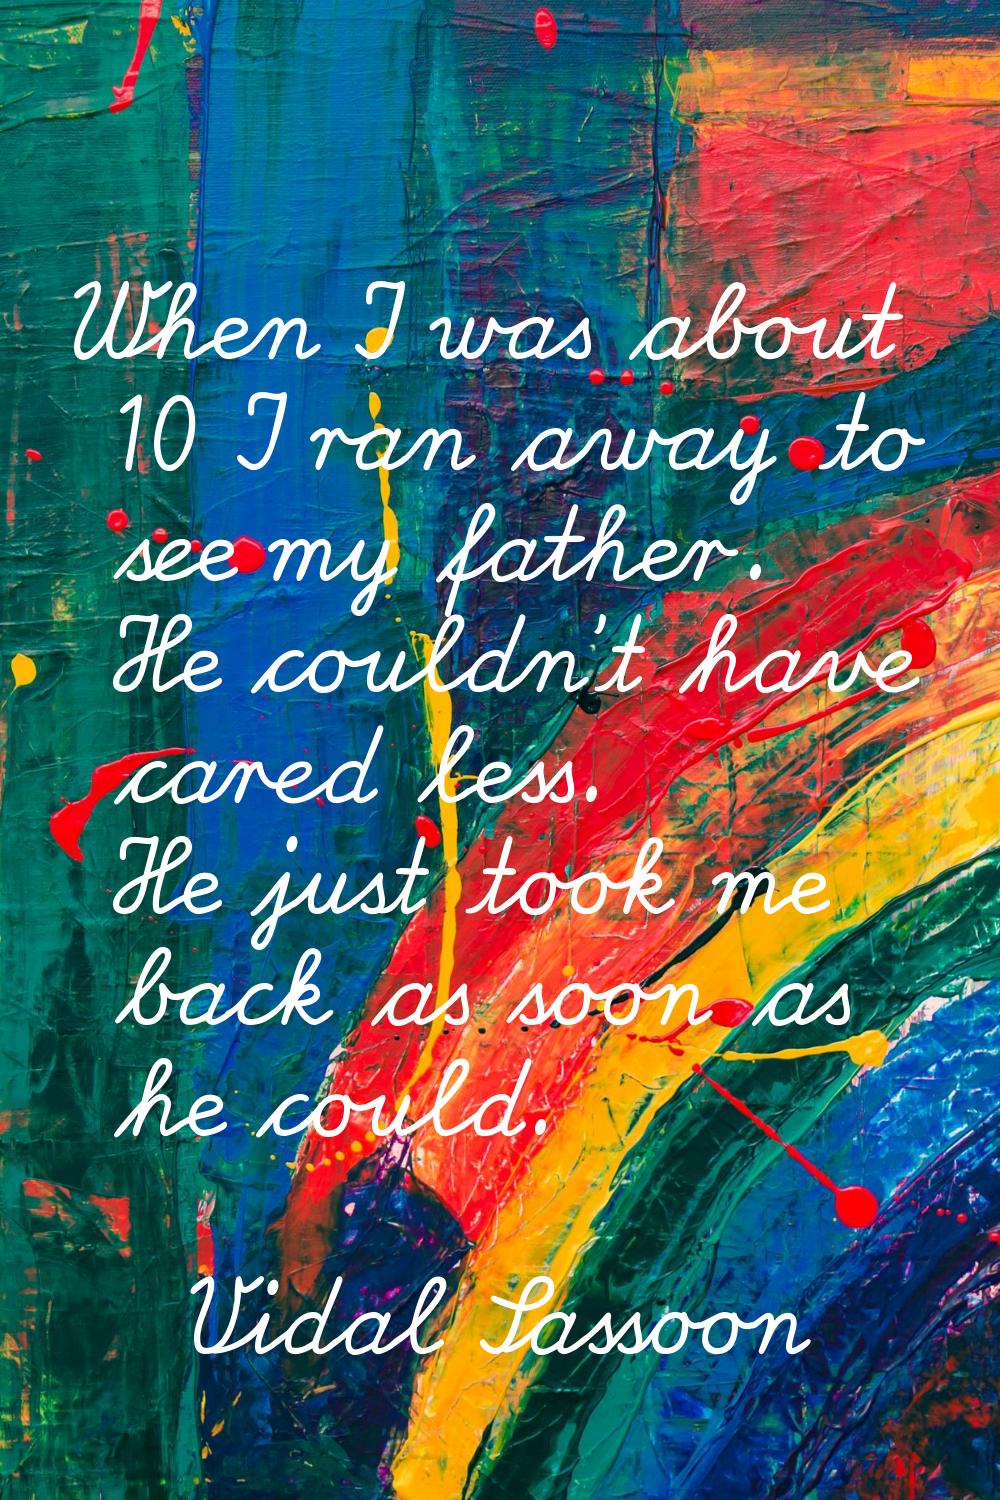 When I was about 10 I ran away to see my father. He couldn't have cared less. He just took me back 